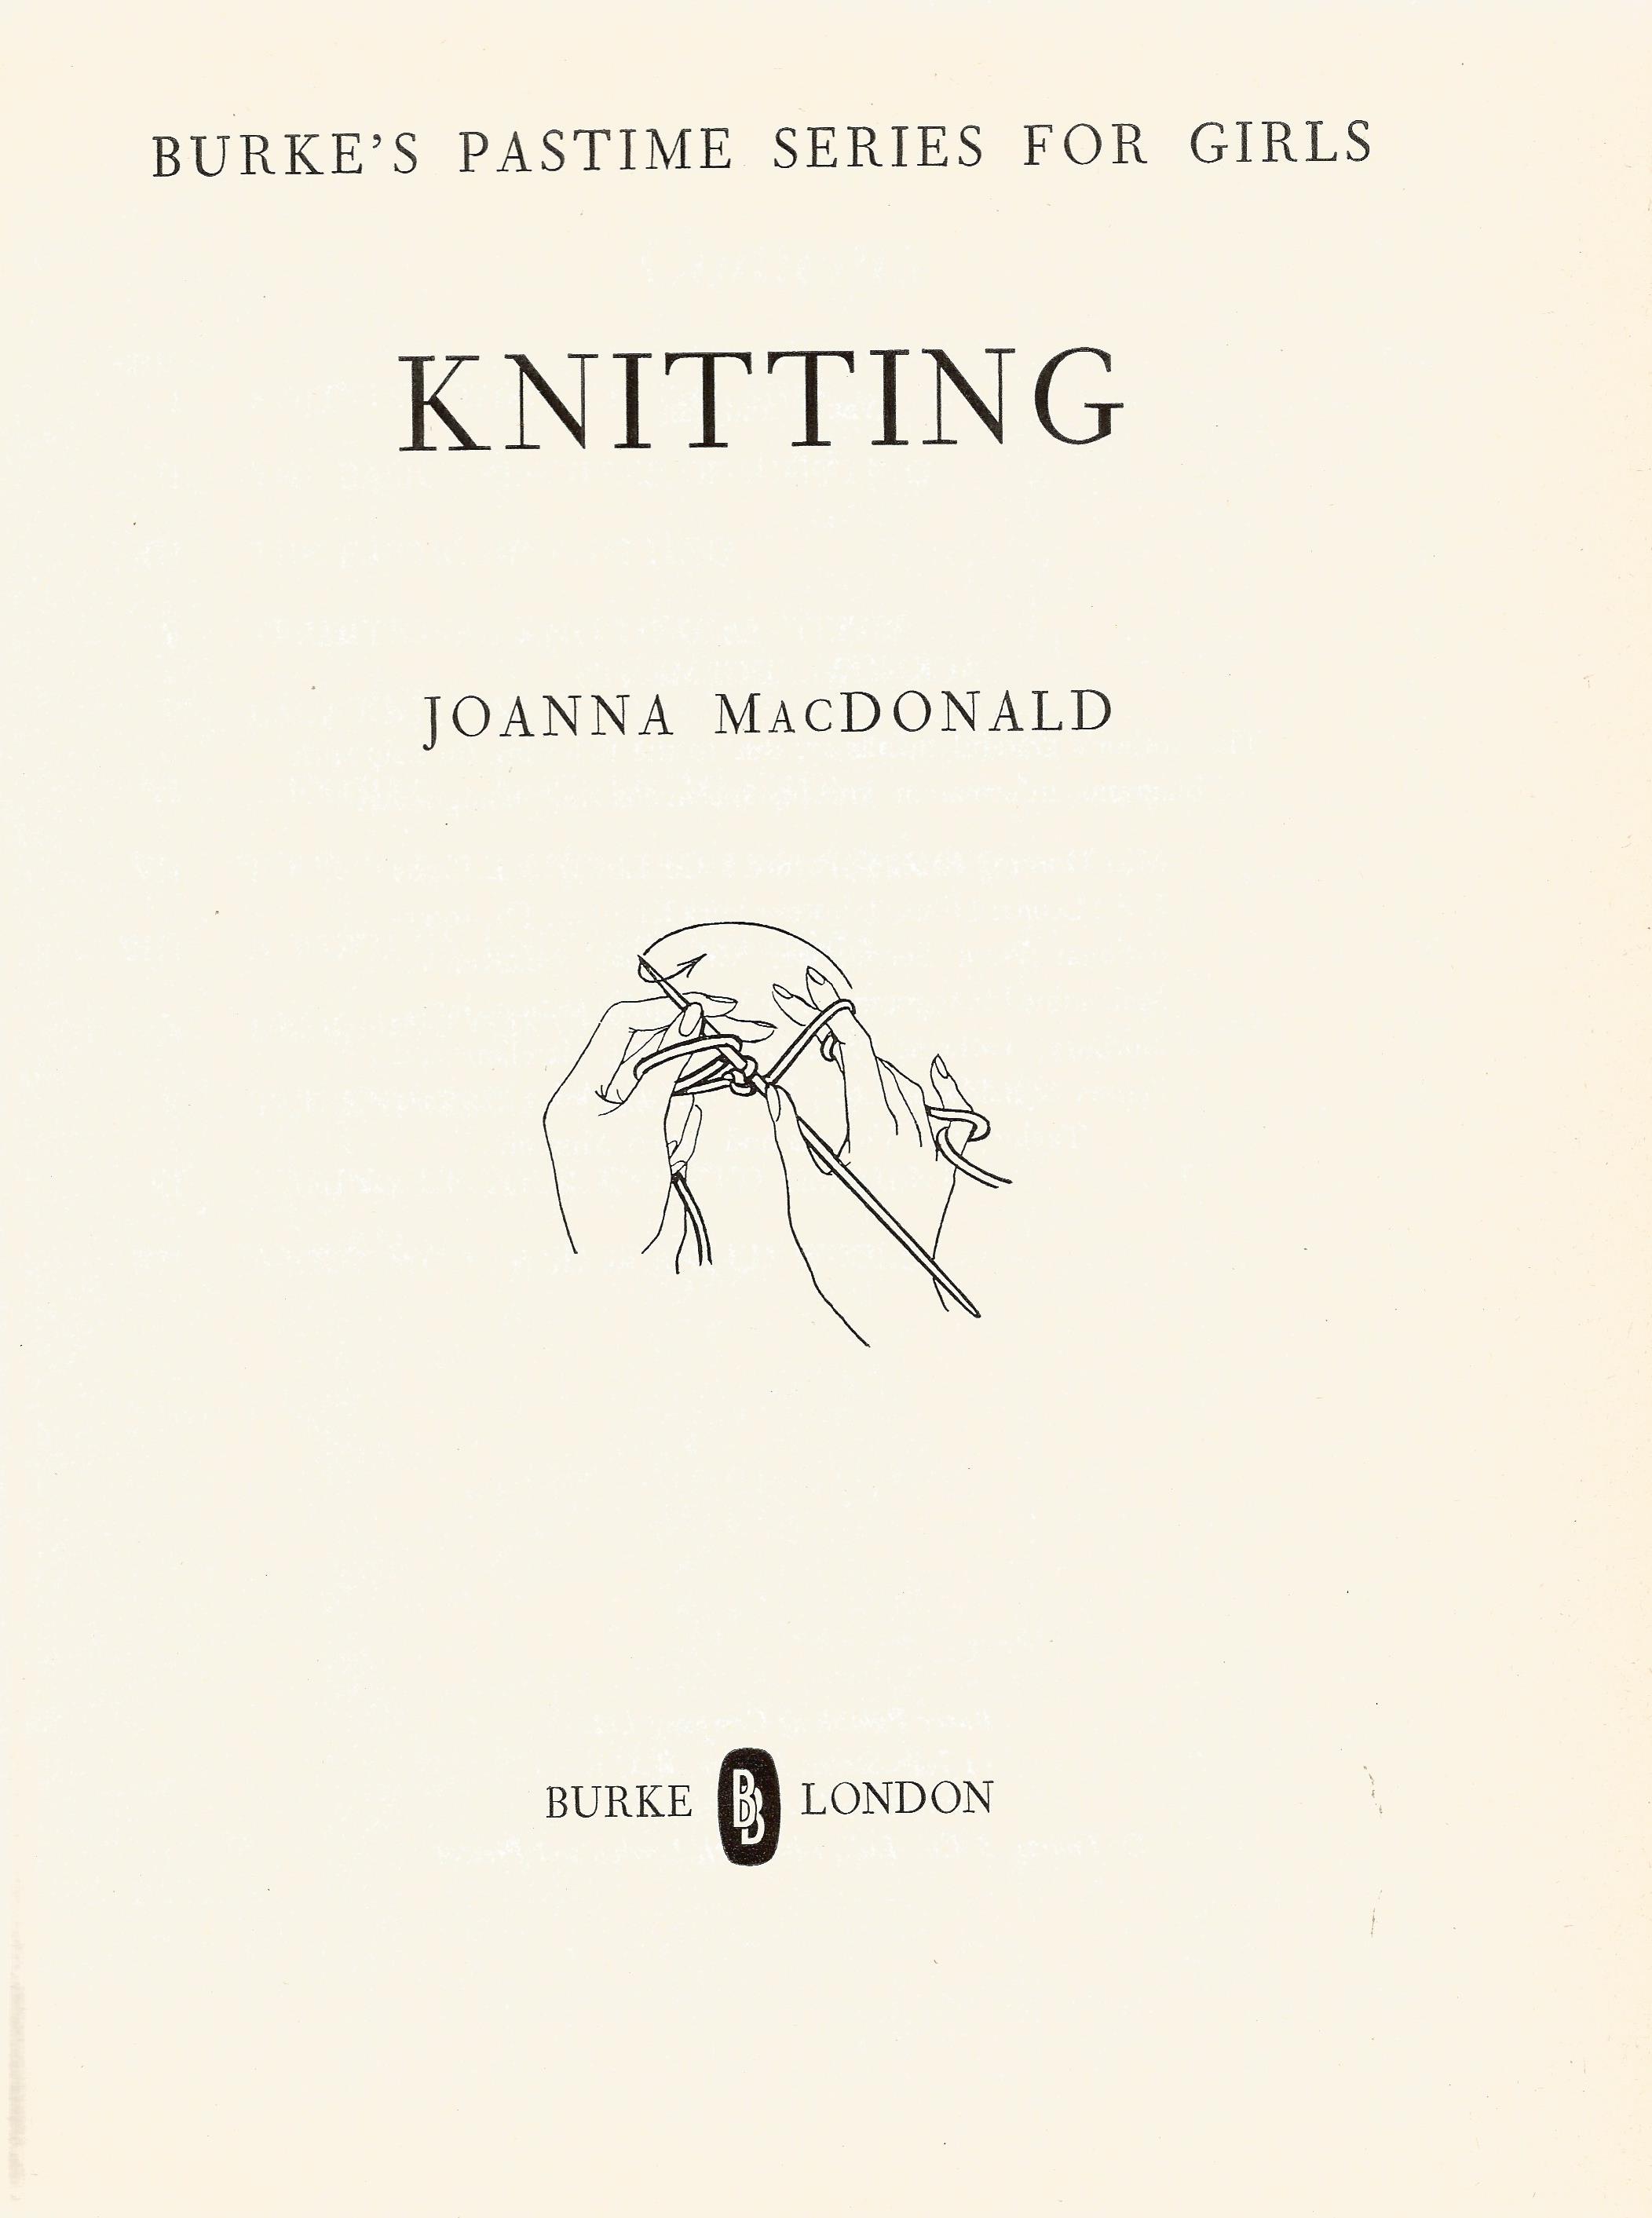 Burke Publishing Co Ltd publication Knitting by Joanna MacDonald 1962 in good condition. Sold on - Image 2 of 2